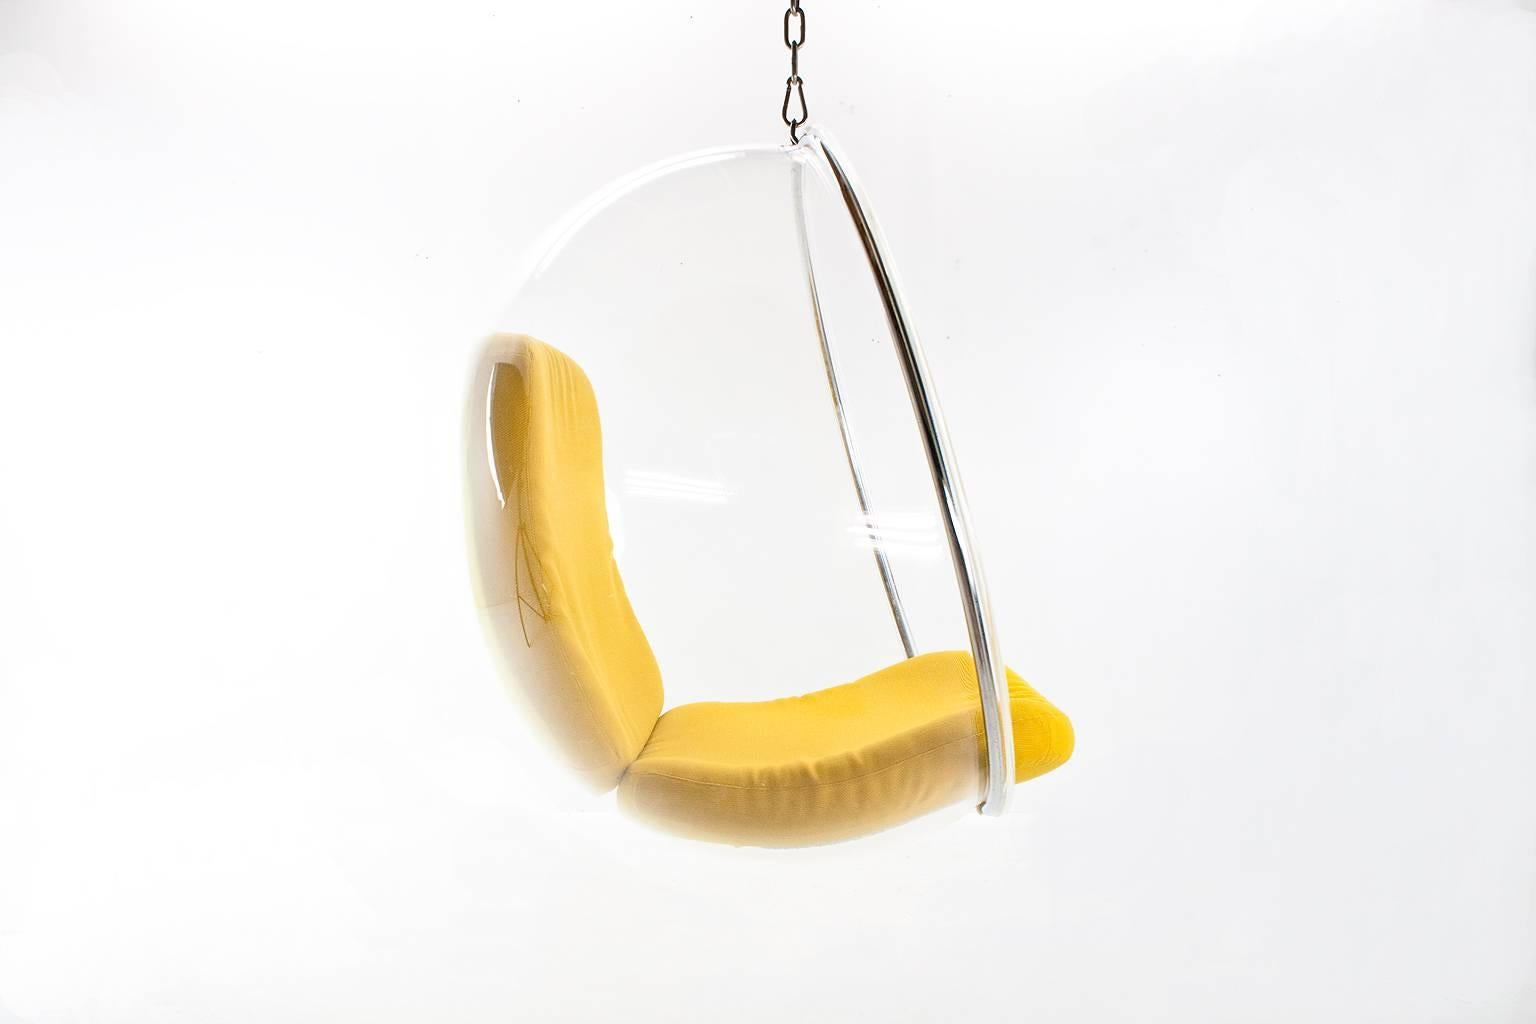 Iconic bubble chair designed by Eero Aarnio in 1968. This newer licensed production is produced by Aldelta. The sleek, instantly recognizable design is fabricated by heated acrylic which is then blown into a shape like a soap bubble. The edge is